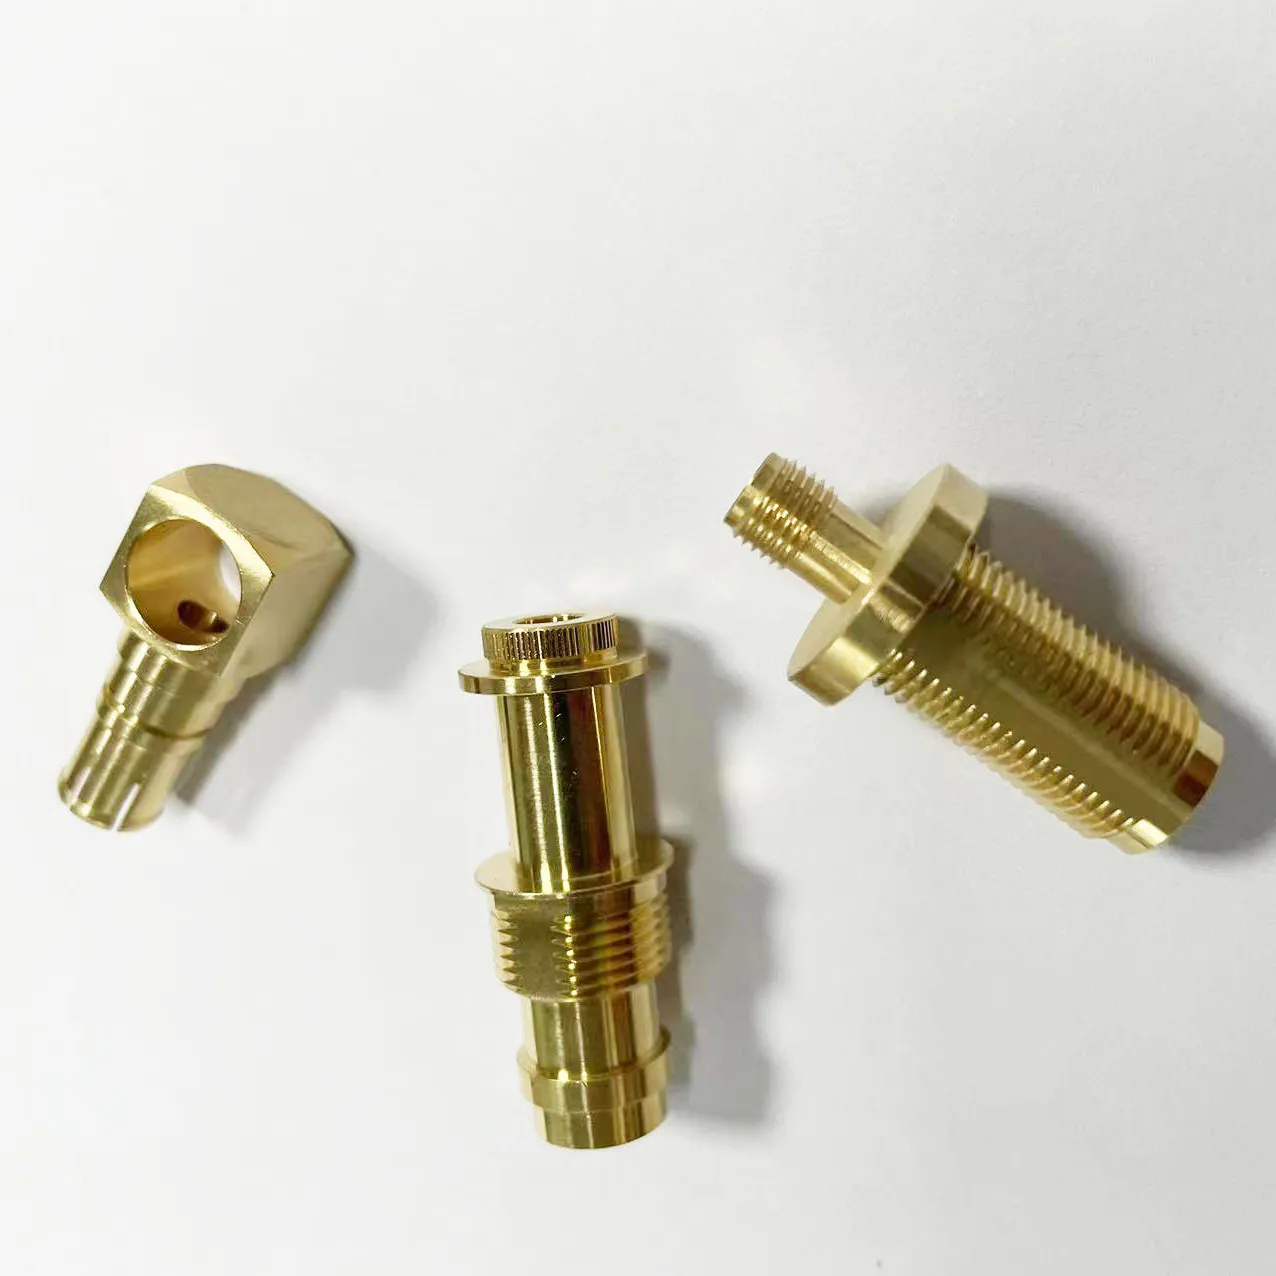 Brass Compression Fitting Male Coupling Pipe Fitting Male quick connector union compression Adaptor